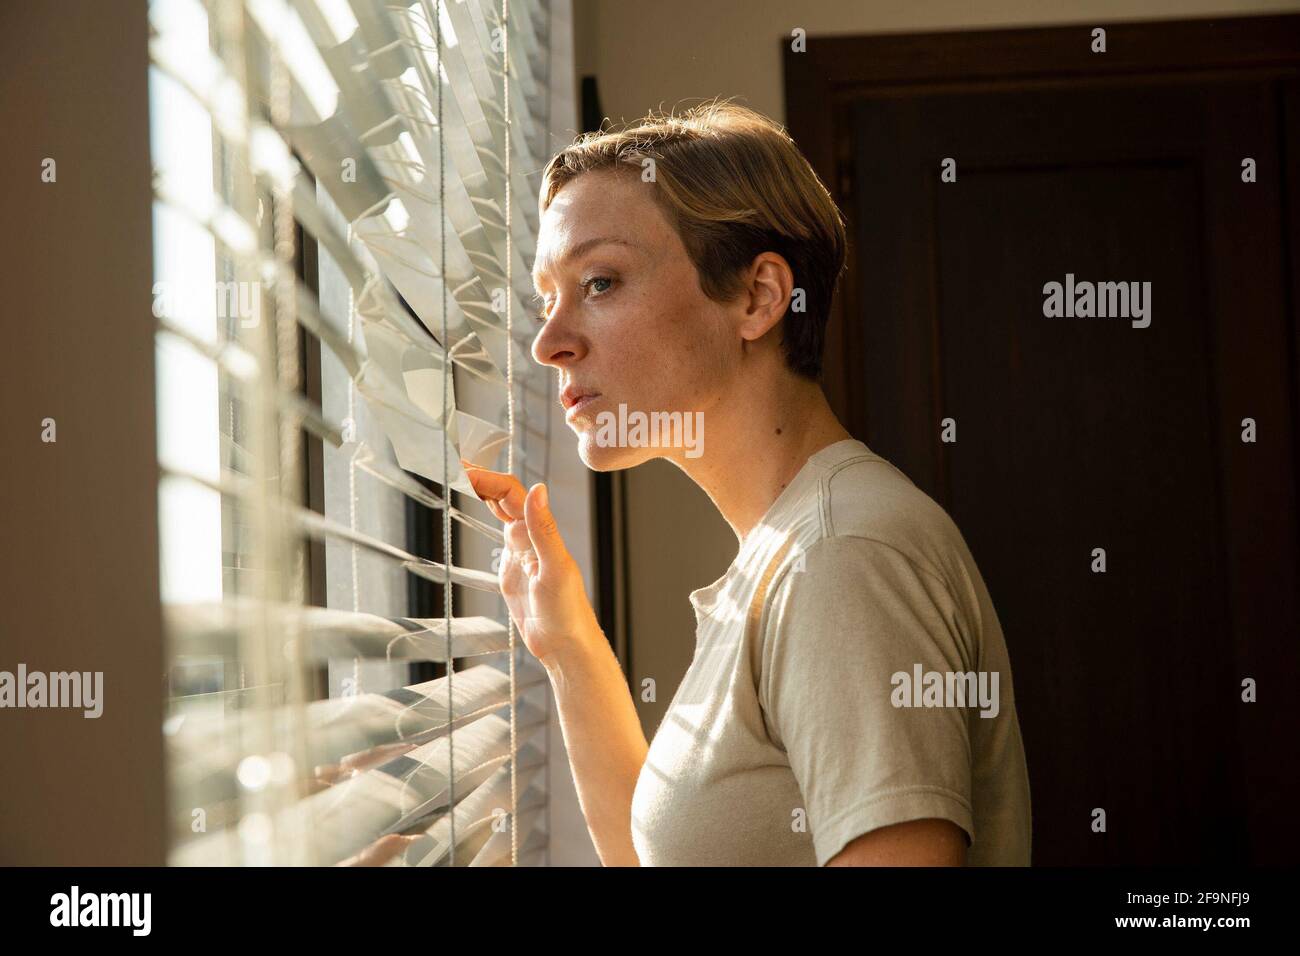 CHLOE SEVIGNY in WE ARE WHO WE ARE (2020), directed by LUCA GUADAGNINO. Credit: HBO / Album Stock Photo